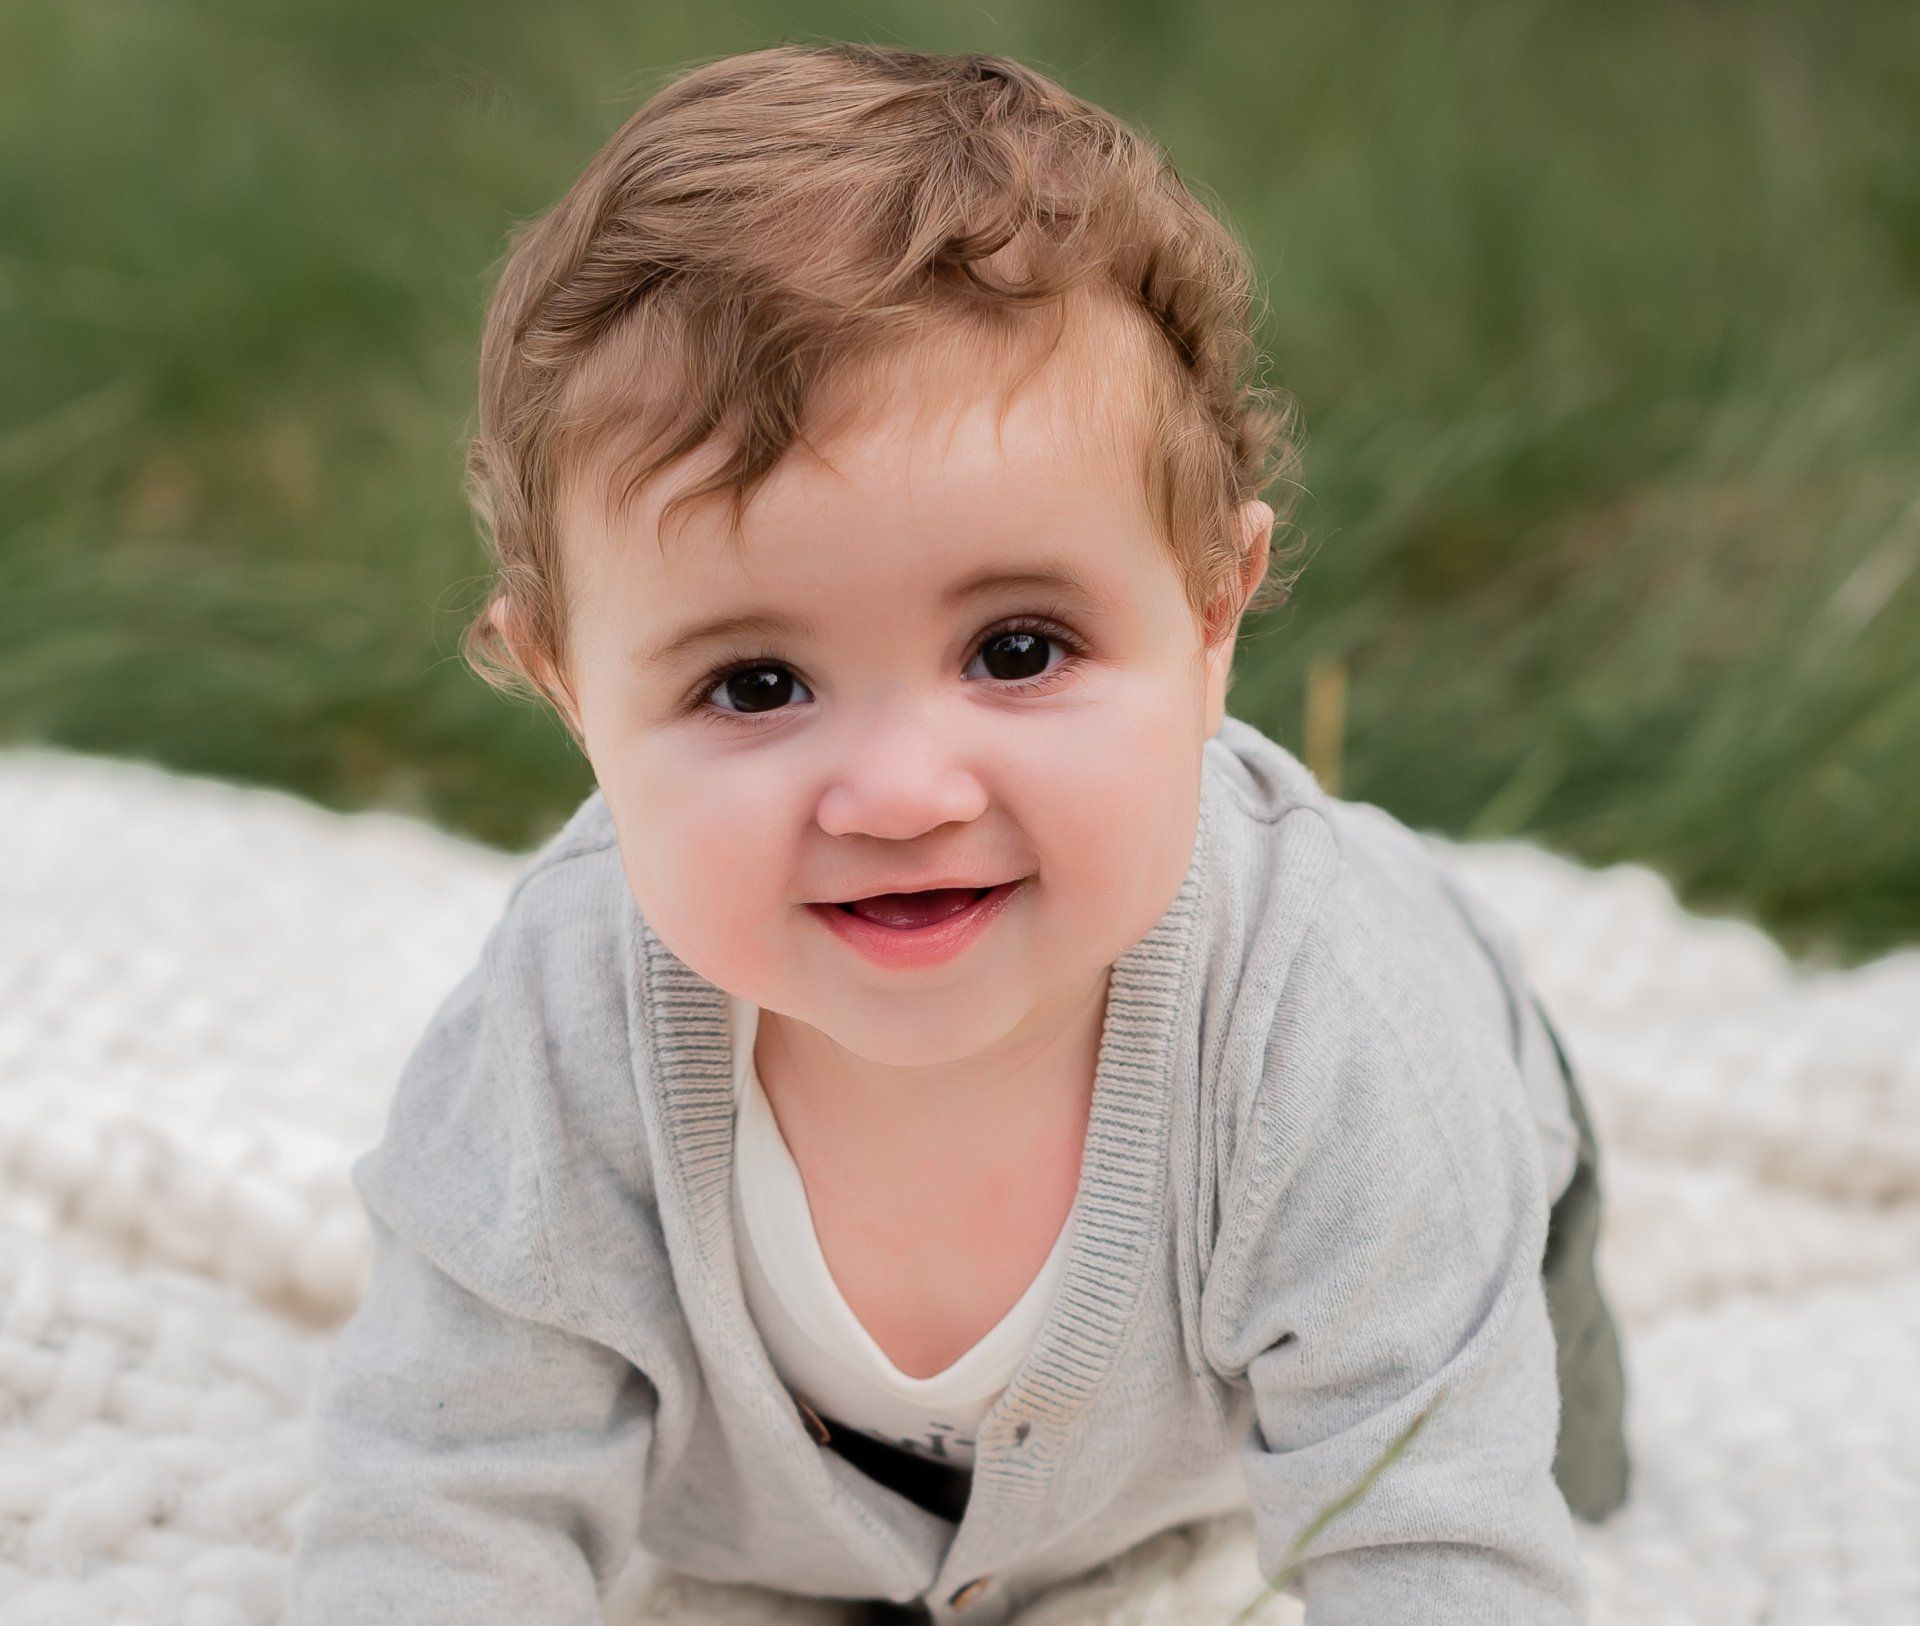 Young toddler |  Child photography | Stacey Naglie Toronto